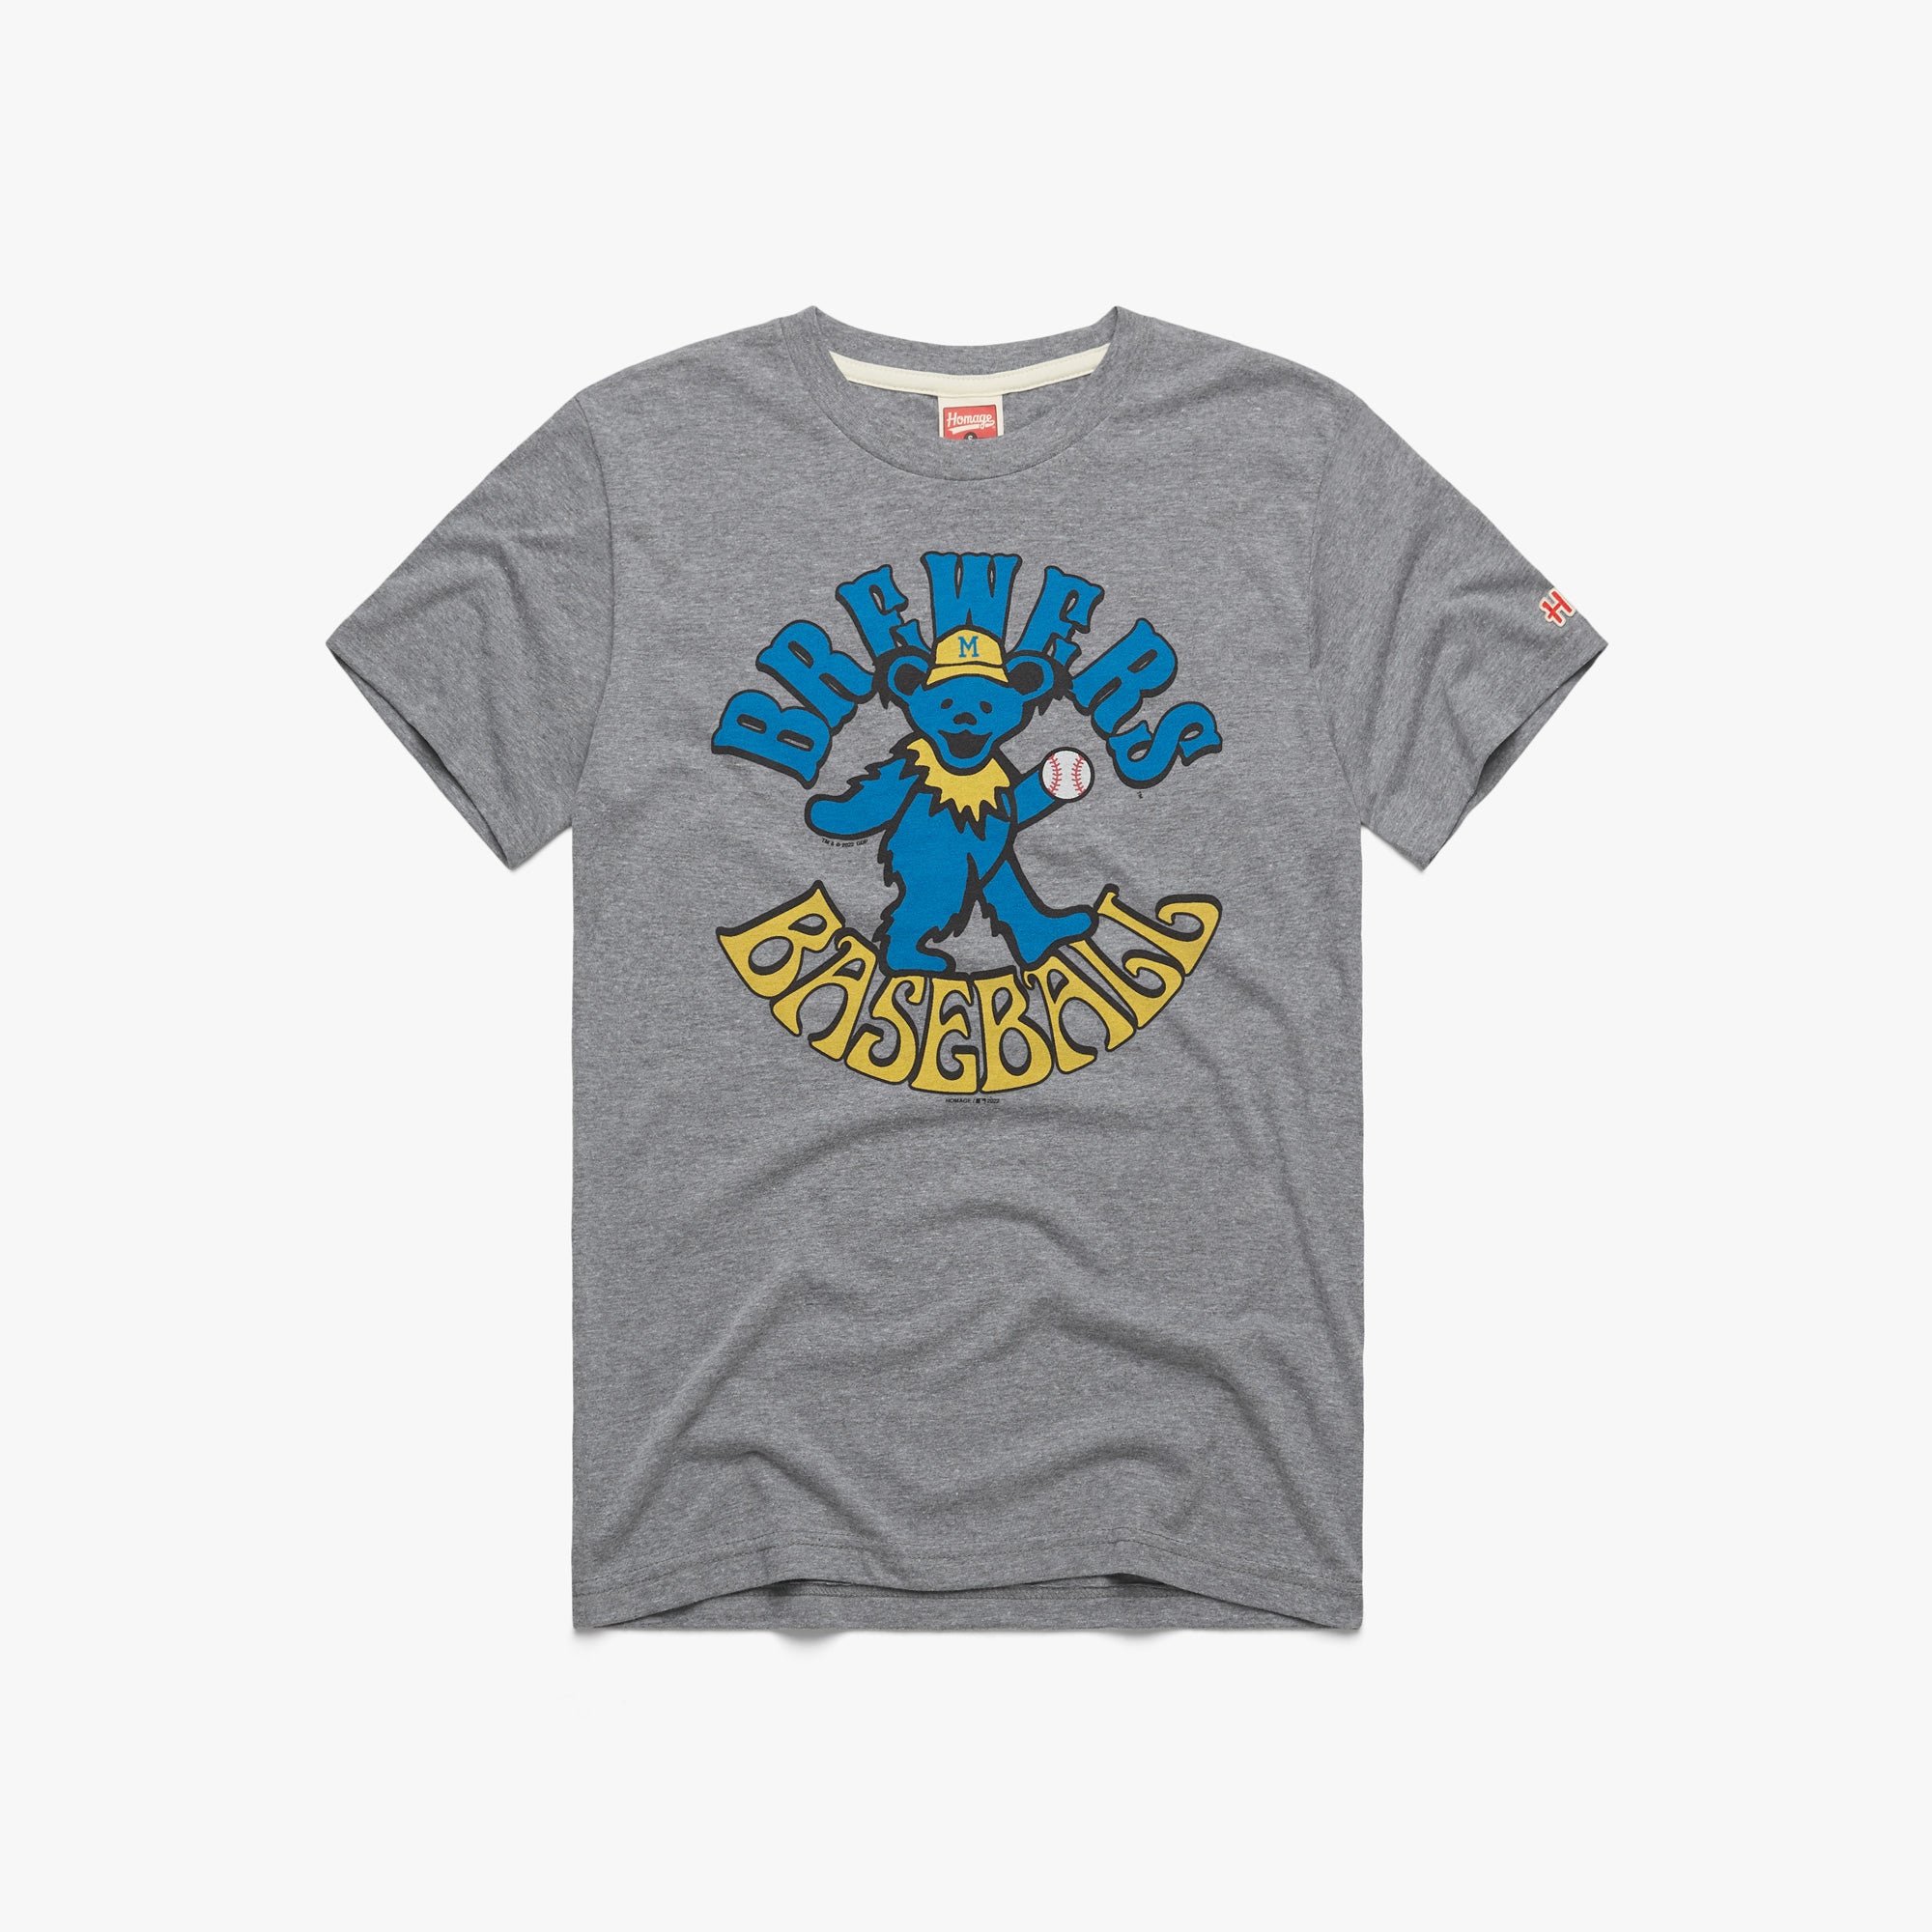 MLB x Grateful Dead x Brewers T-Shirt from Homage. | Grey | Vintage Apparel from Homage.